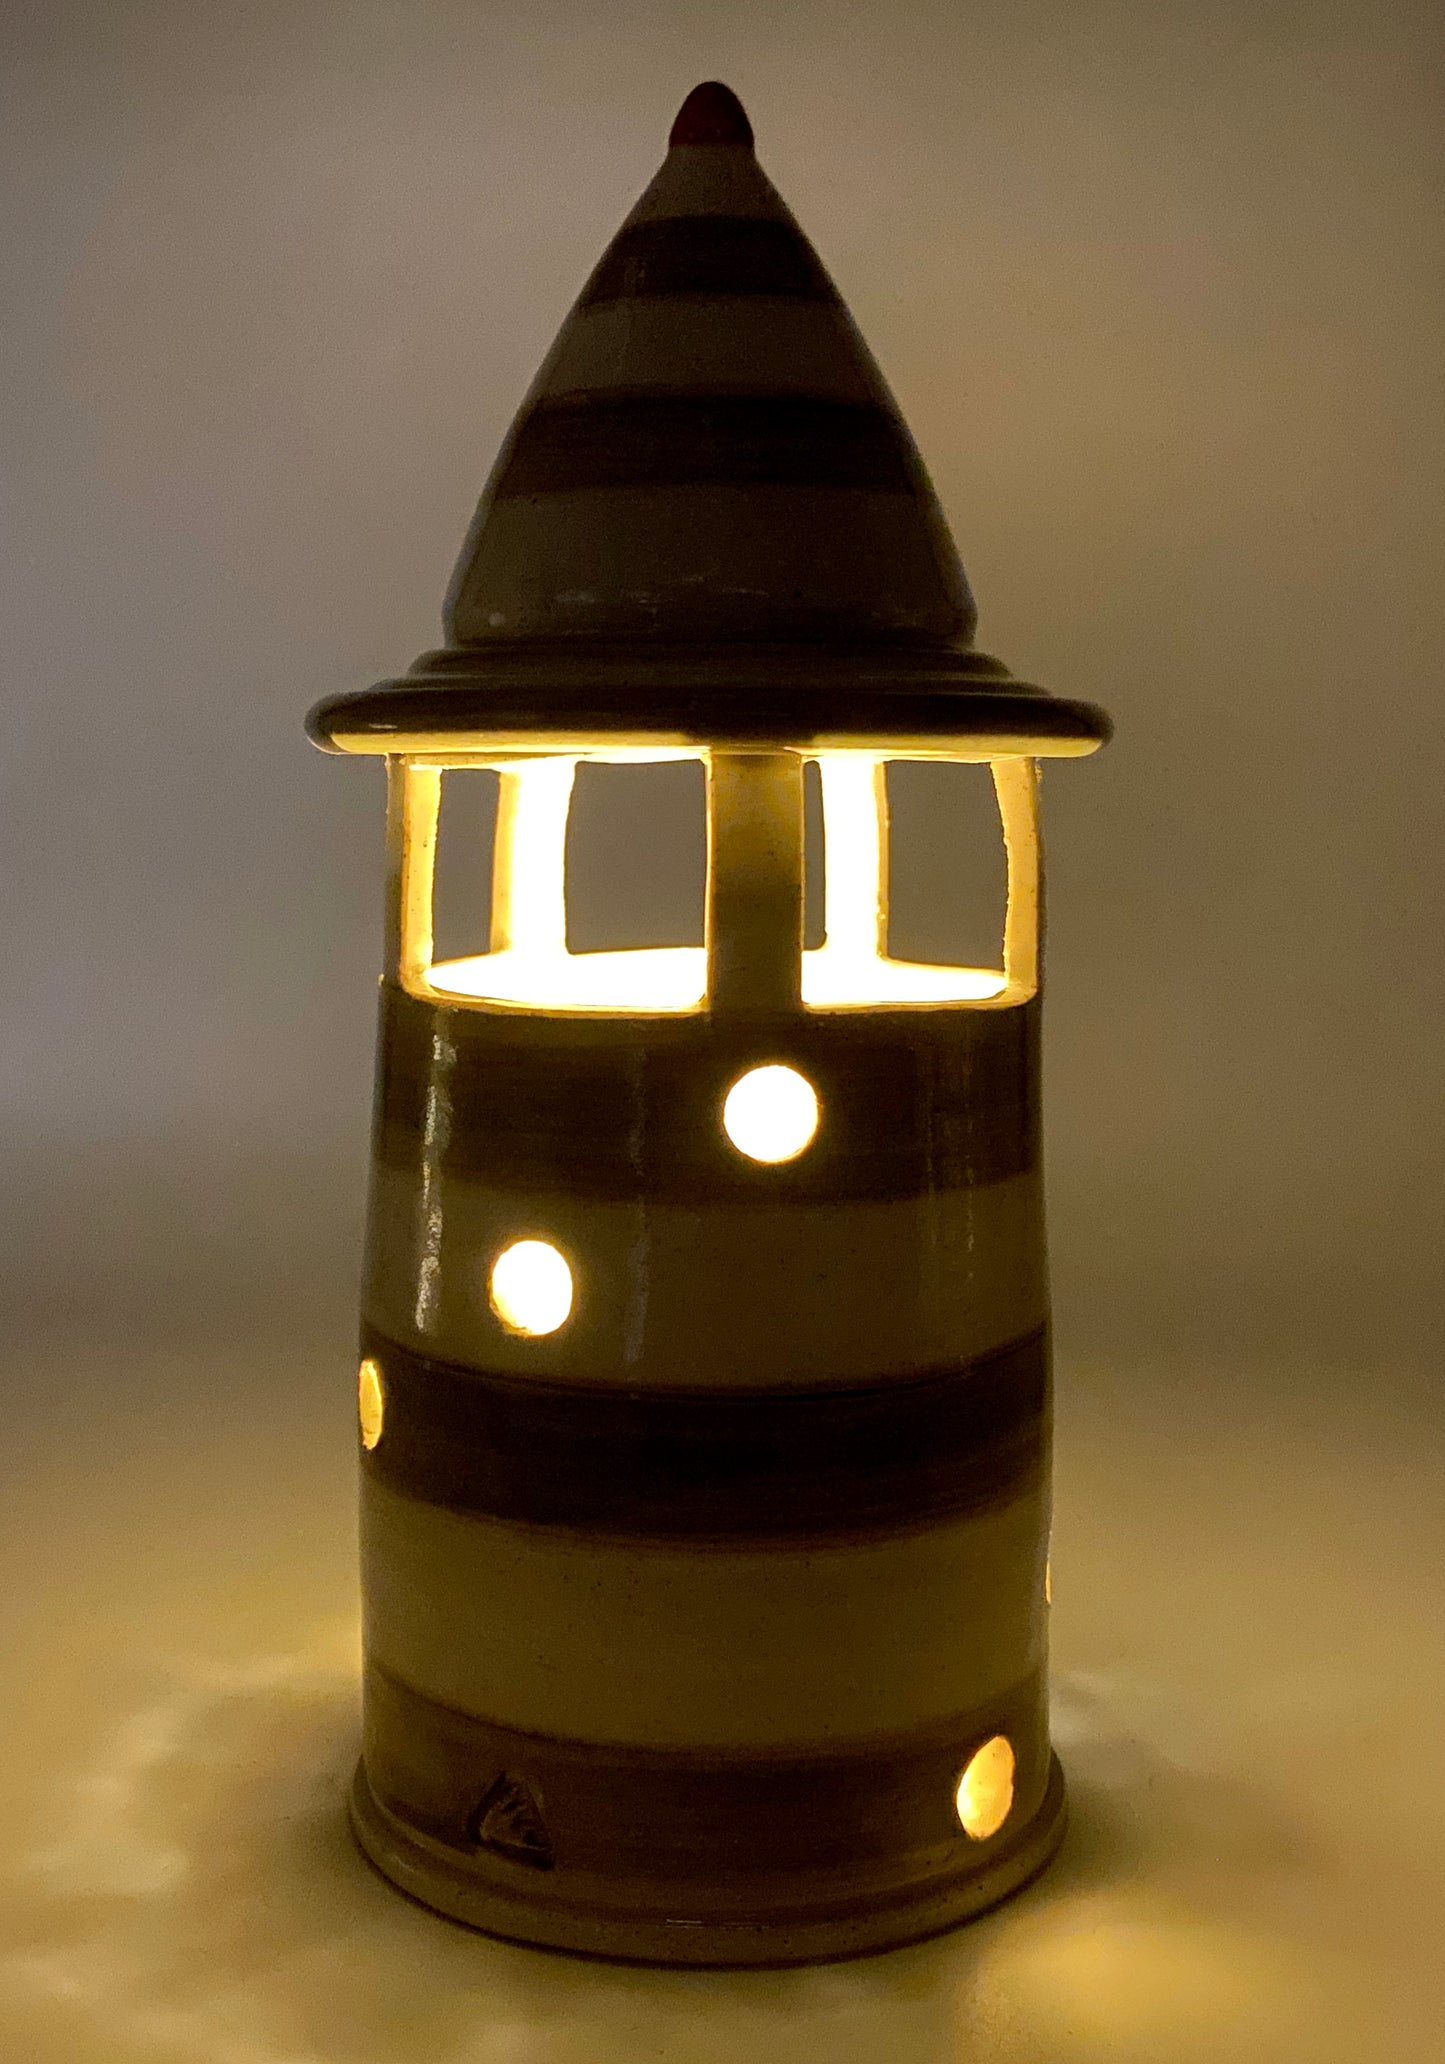 Green and White Lighthouse Luminary